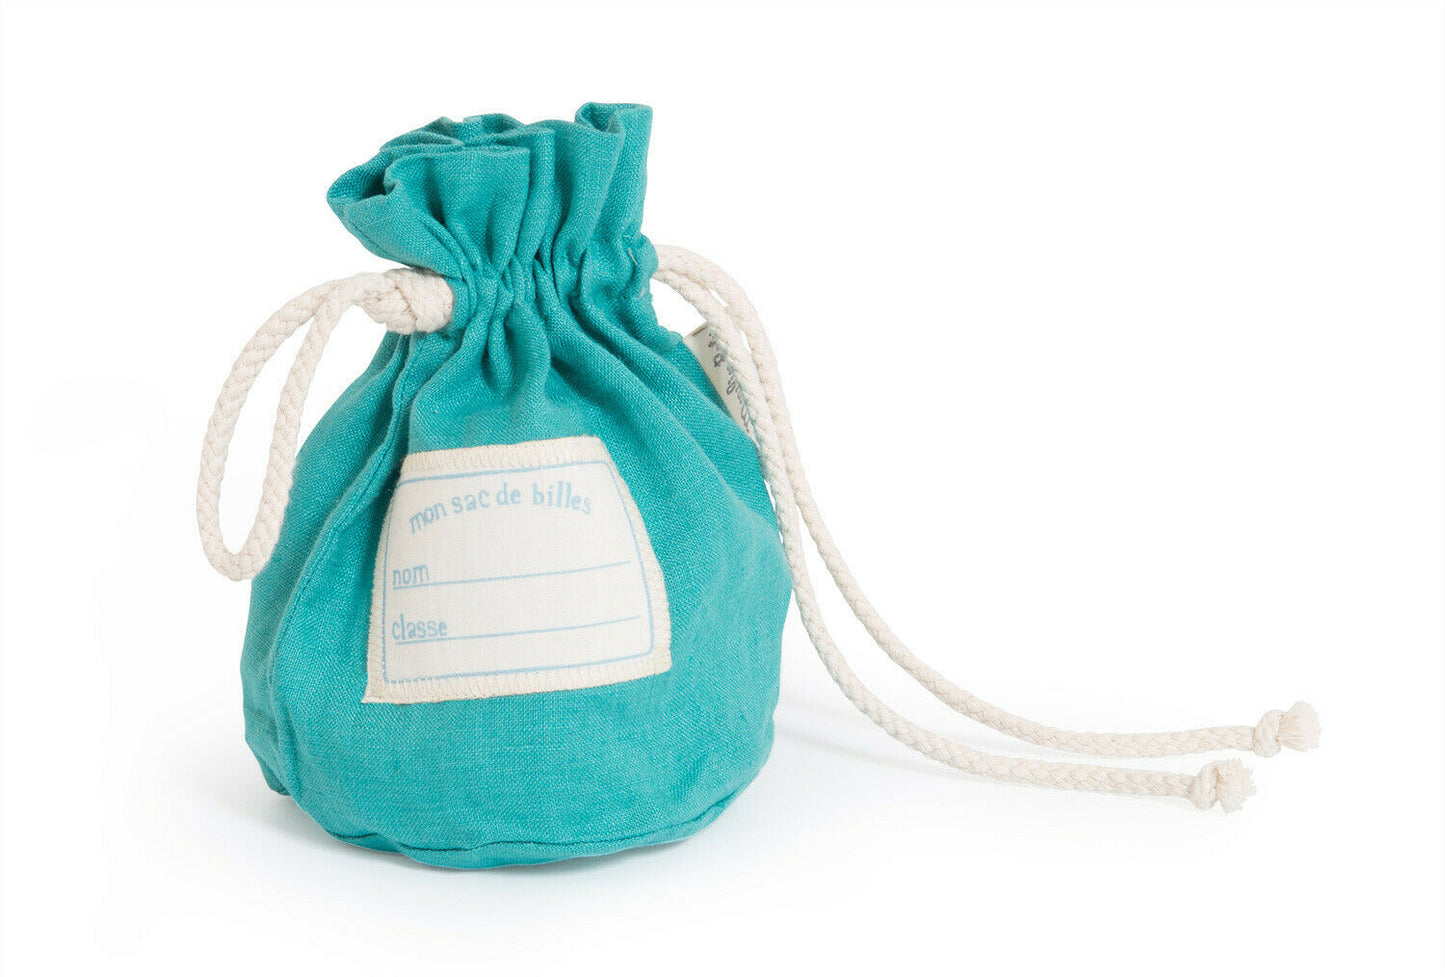 Turquoise bag of marbles